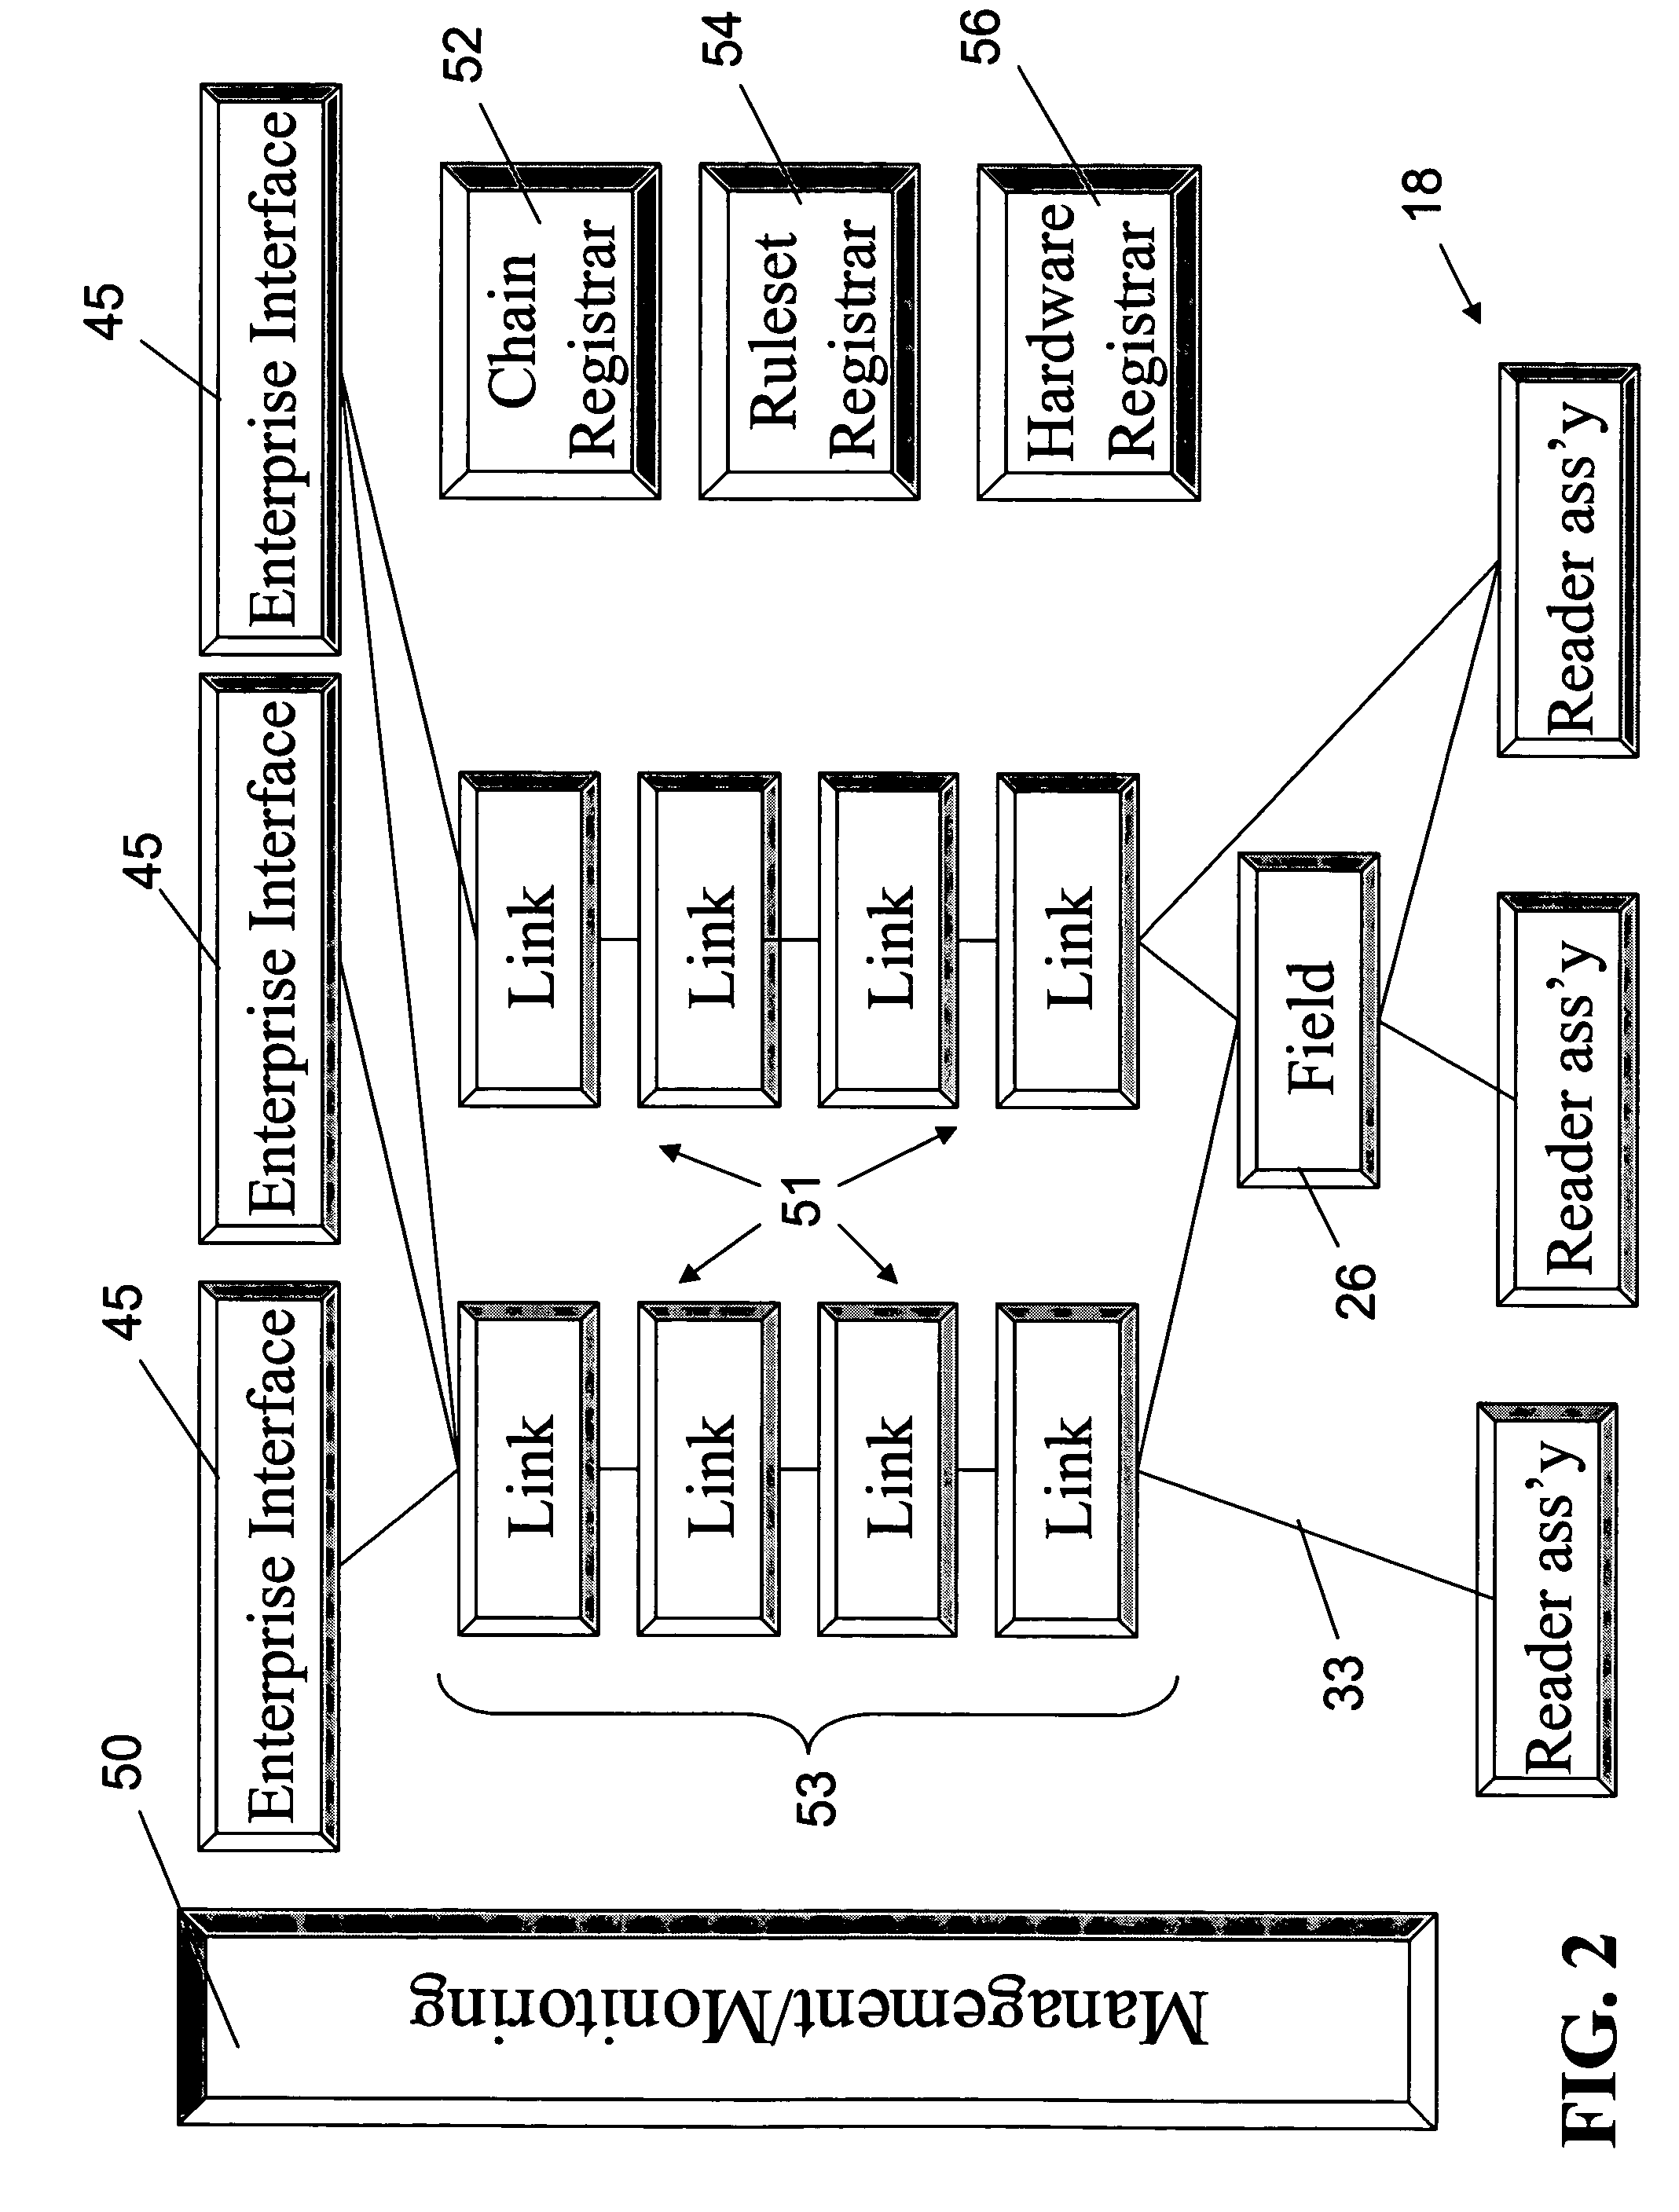 System and method for RFID system integration